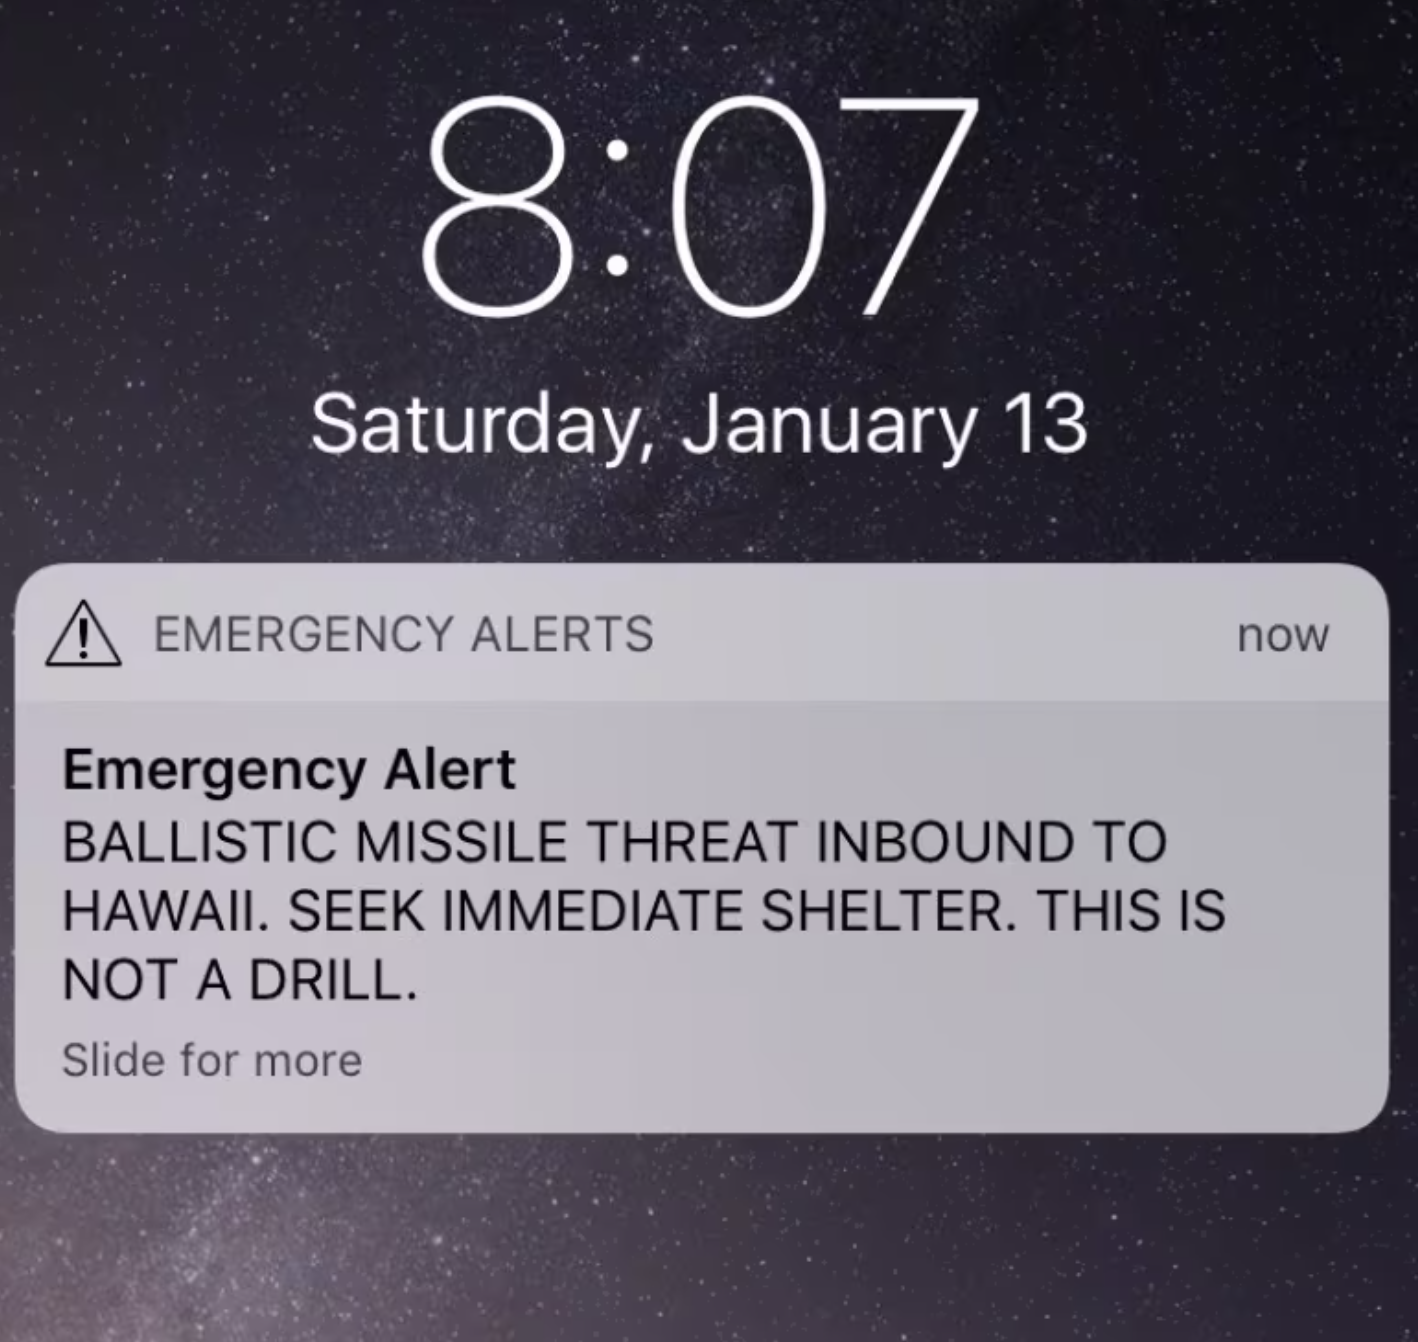 screenshot - Saturday, January 13 Emergency Alerts Emergency Alert Ballistic Missile Threat Inbound To Hawaii. Seek Immediate Shelter. This Is Not A Drill. Slide for more now